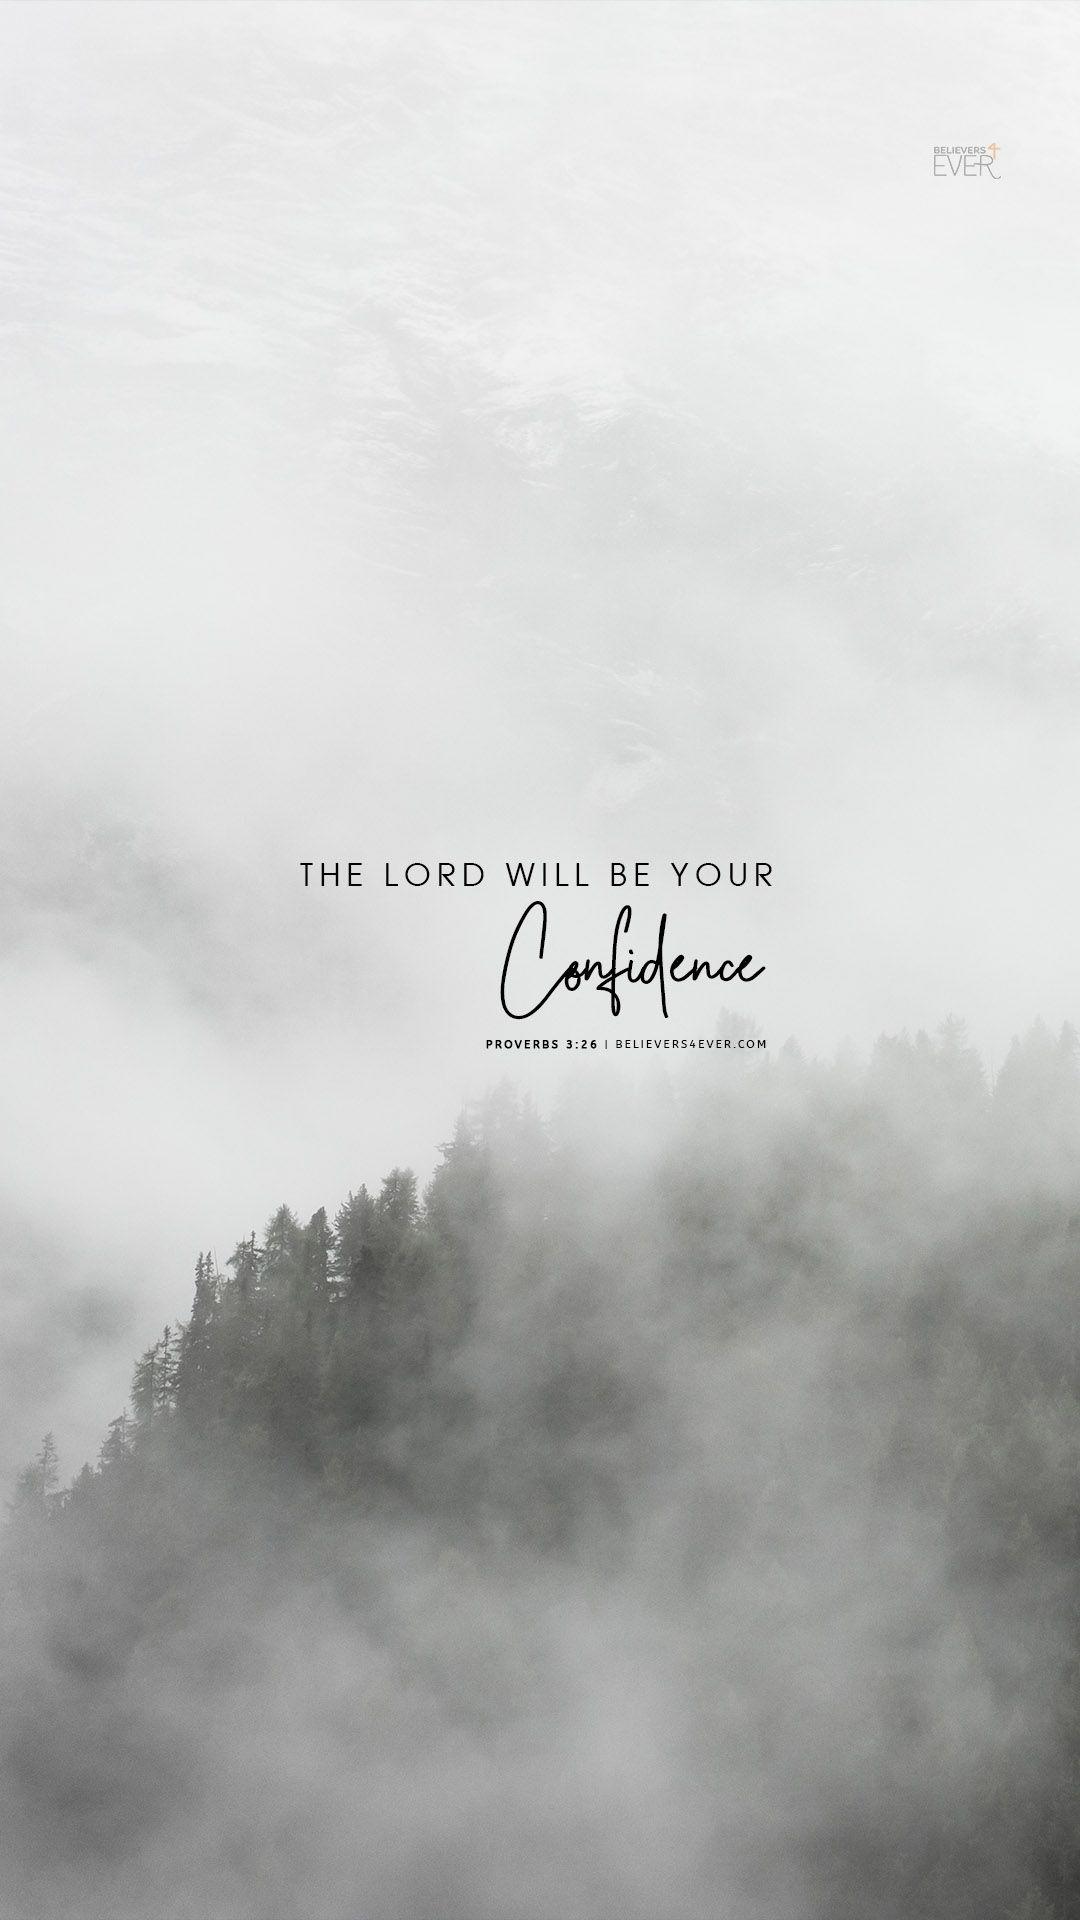 The Lord will be your confidence. Quotes about god, Bible